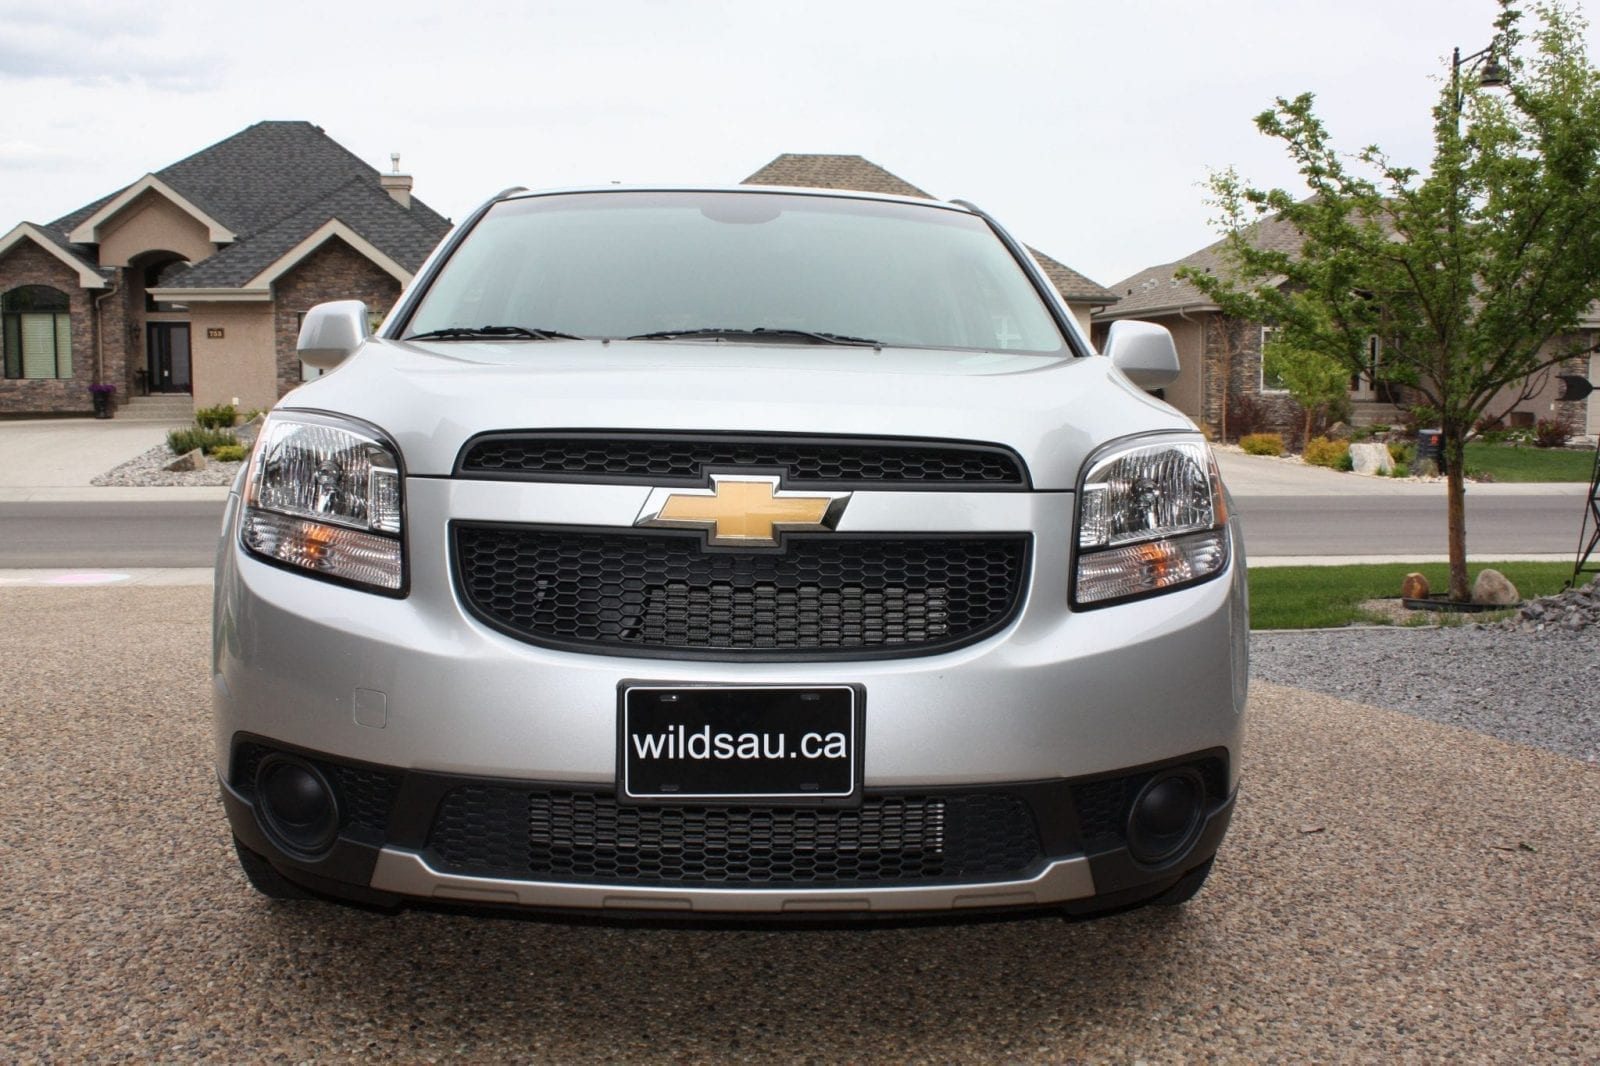 2012 Chevrolet Orlando: Upgrades and corrections - The Car Guide